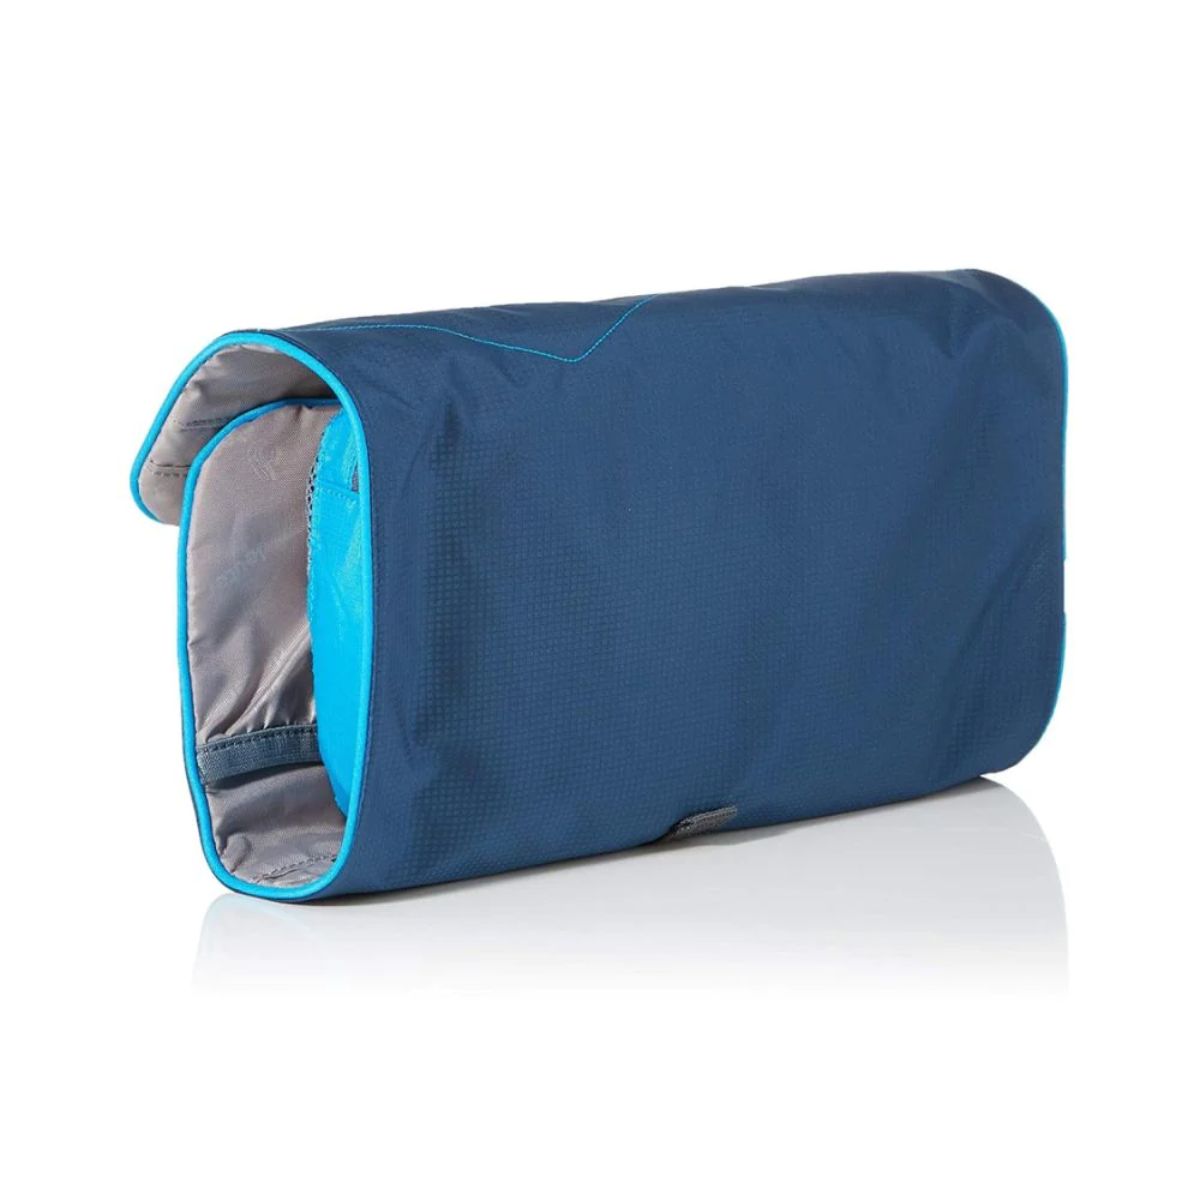 Wash Bag II - Toiletry Bag - Midnight Blue + Turquoise 2